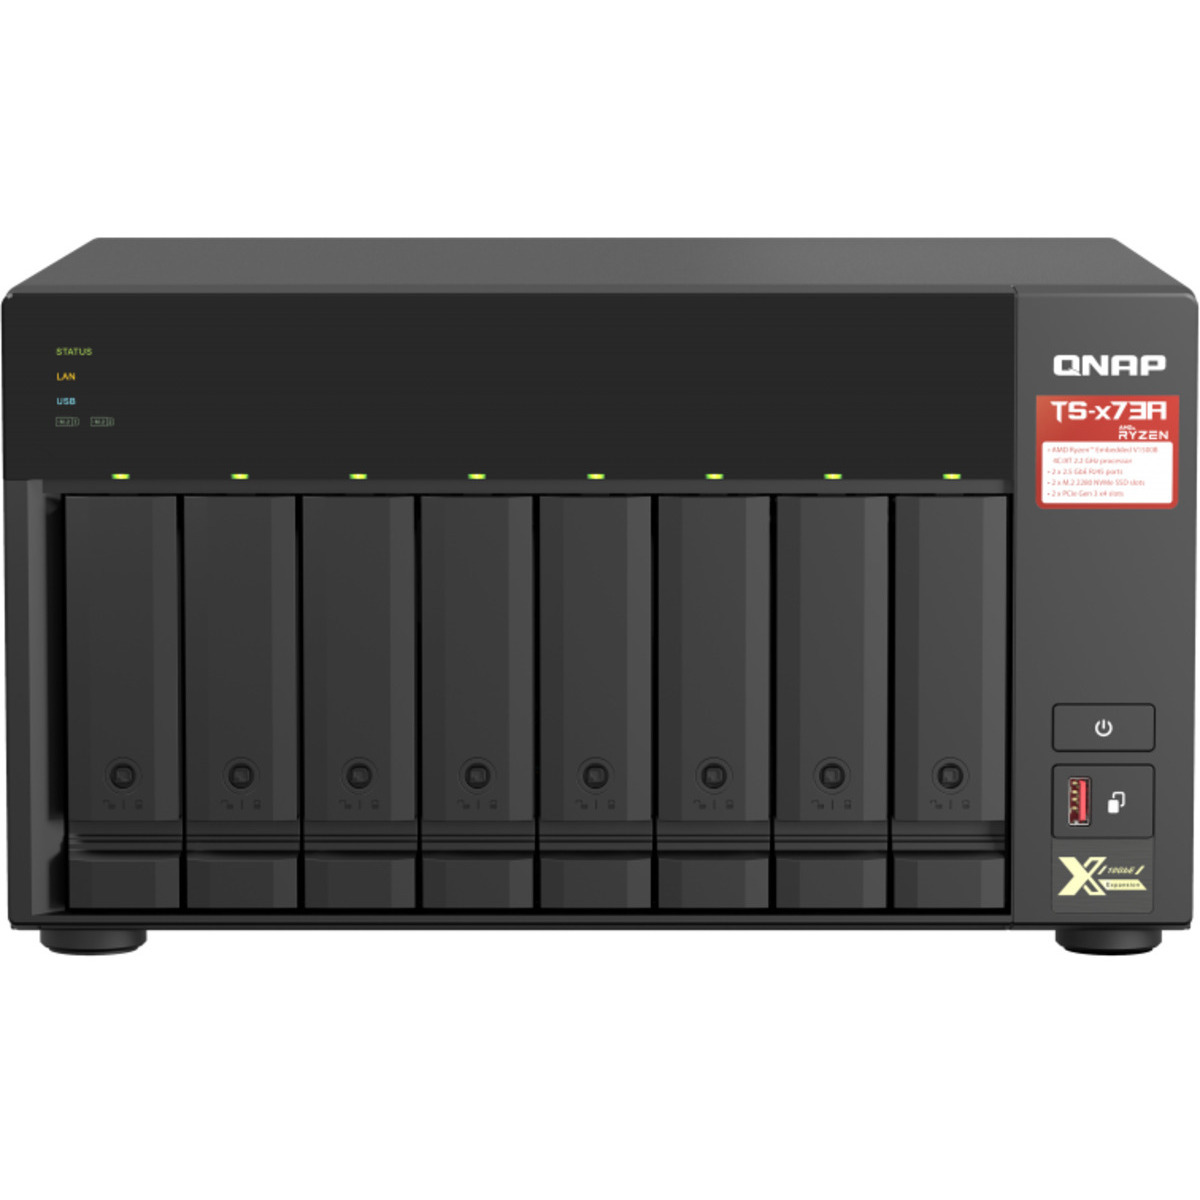 QNAP TS-873A 112tb 8-Bay Desktop Multimedia / Power User / Business NAS - Network Attached Storage Device 7x16tb Toshiba Enterprise Capacity MG08ACA16TE 3.5 7200rpm SATA 6Gb/s HDD ENTERPRISE Class Drives Installed - Burn-In Tested TS-873A